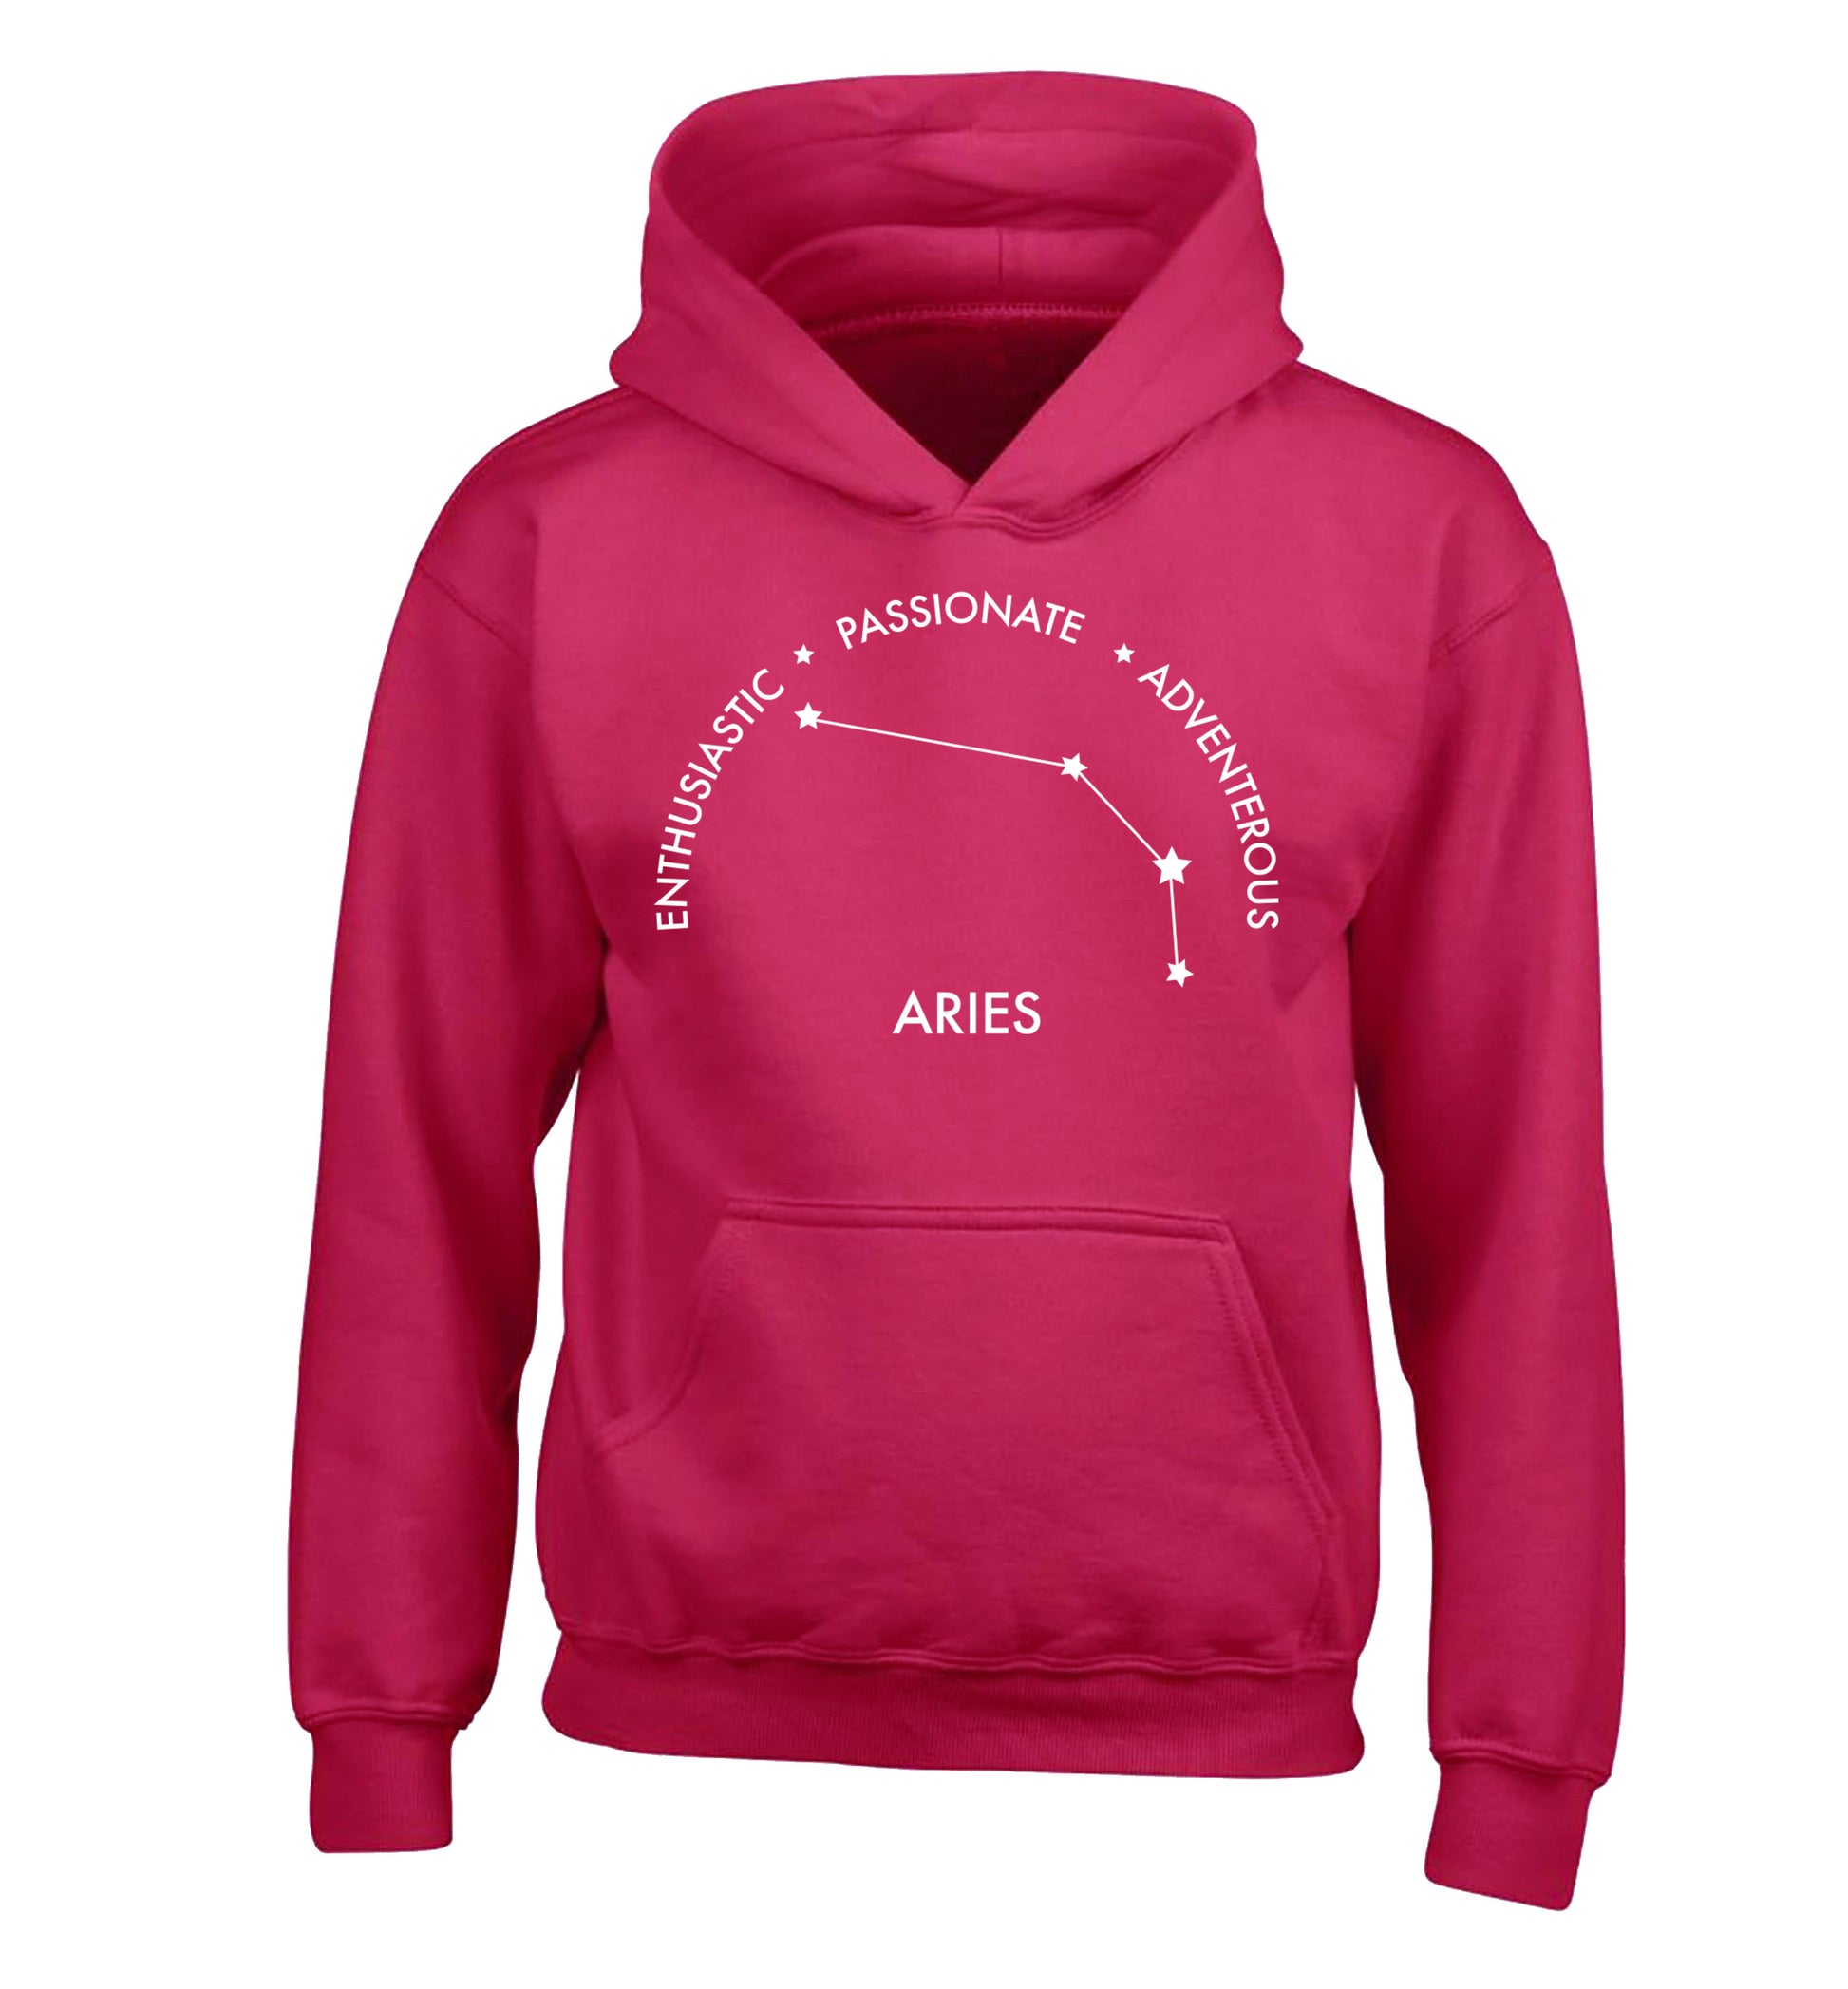 Aries enthusiastic | passionate | adventerous children's pink hoodie 12-13 Years